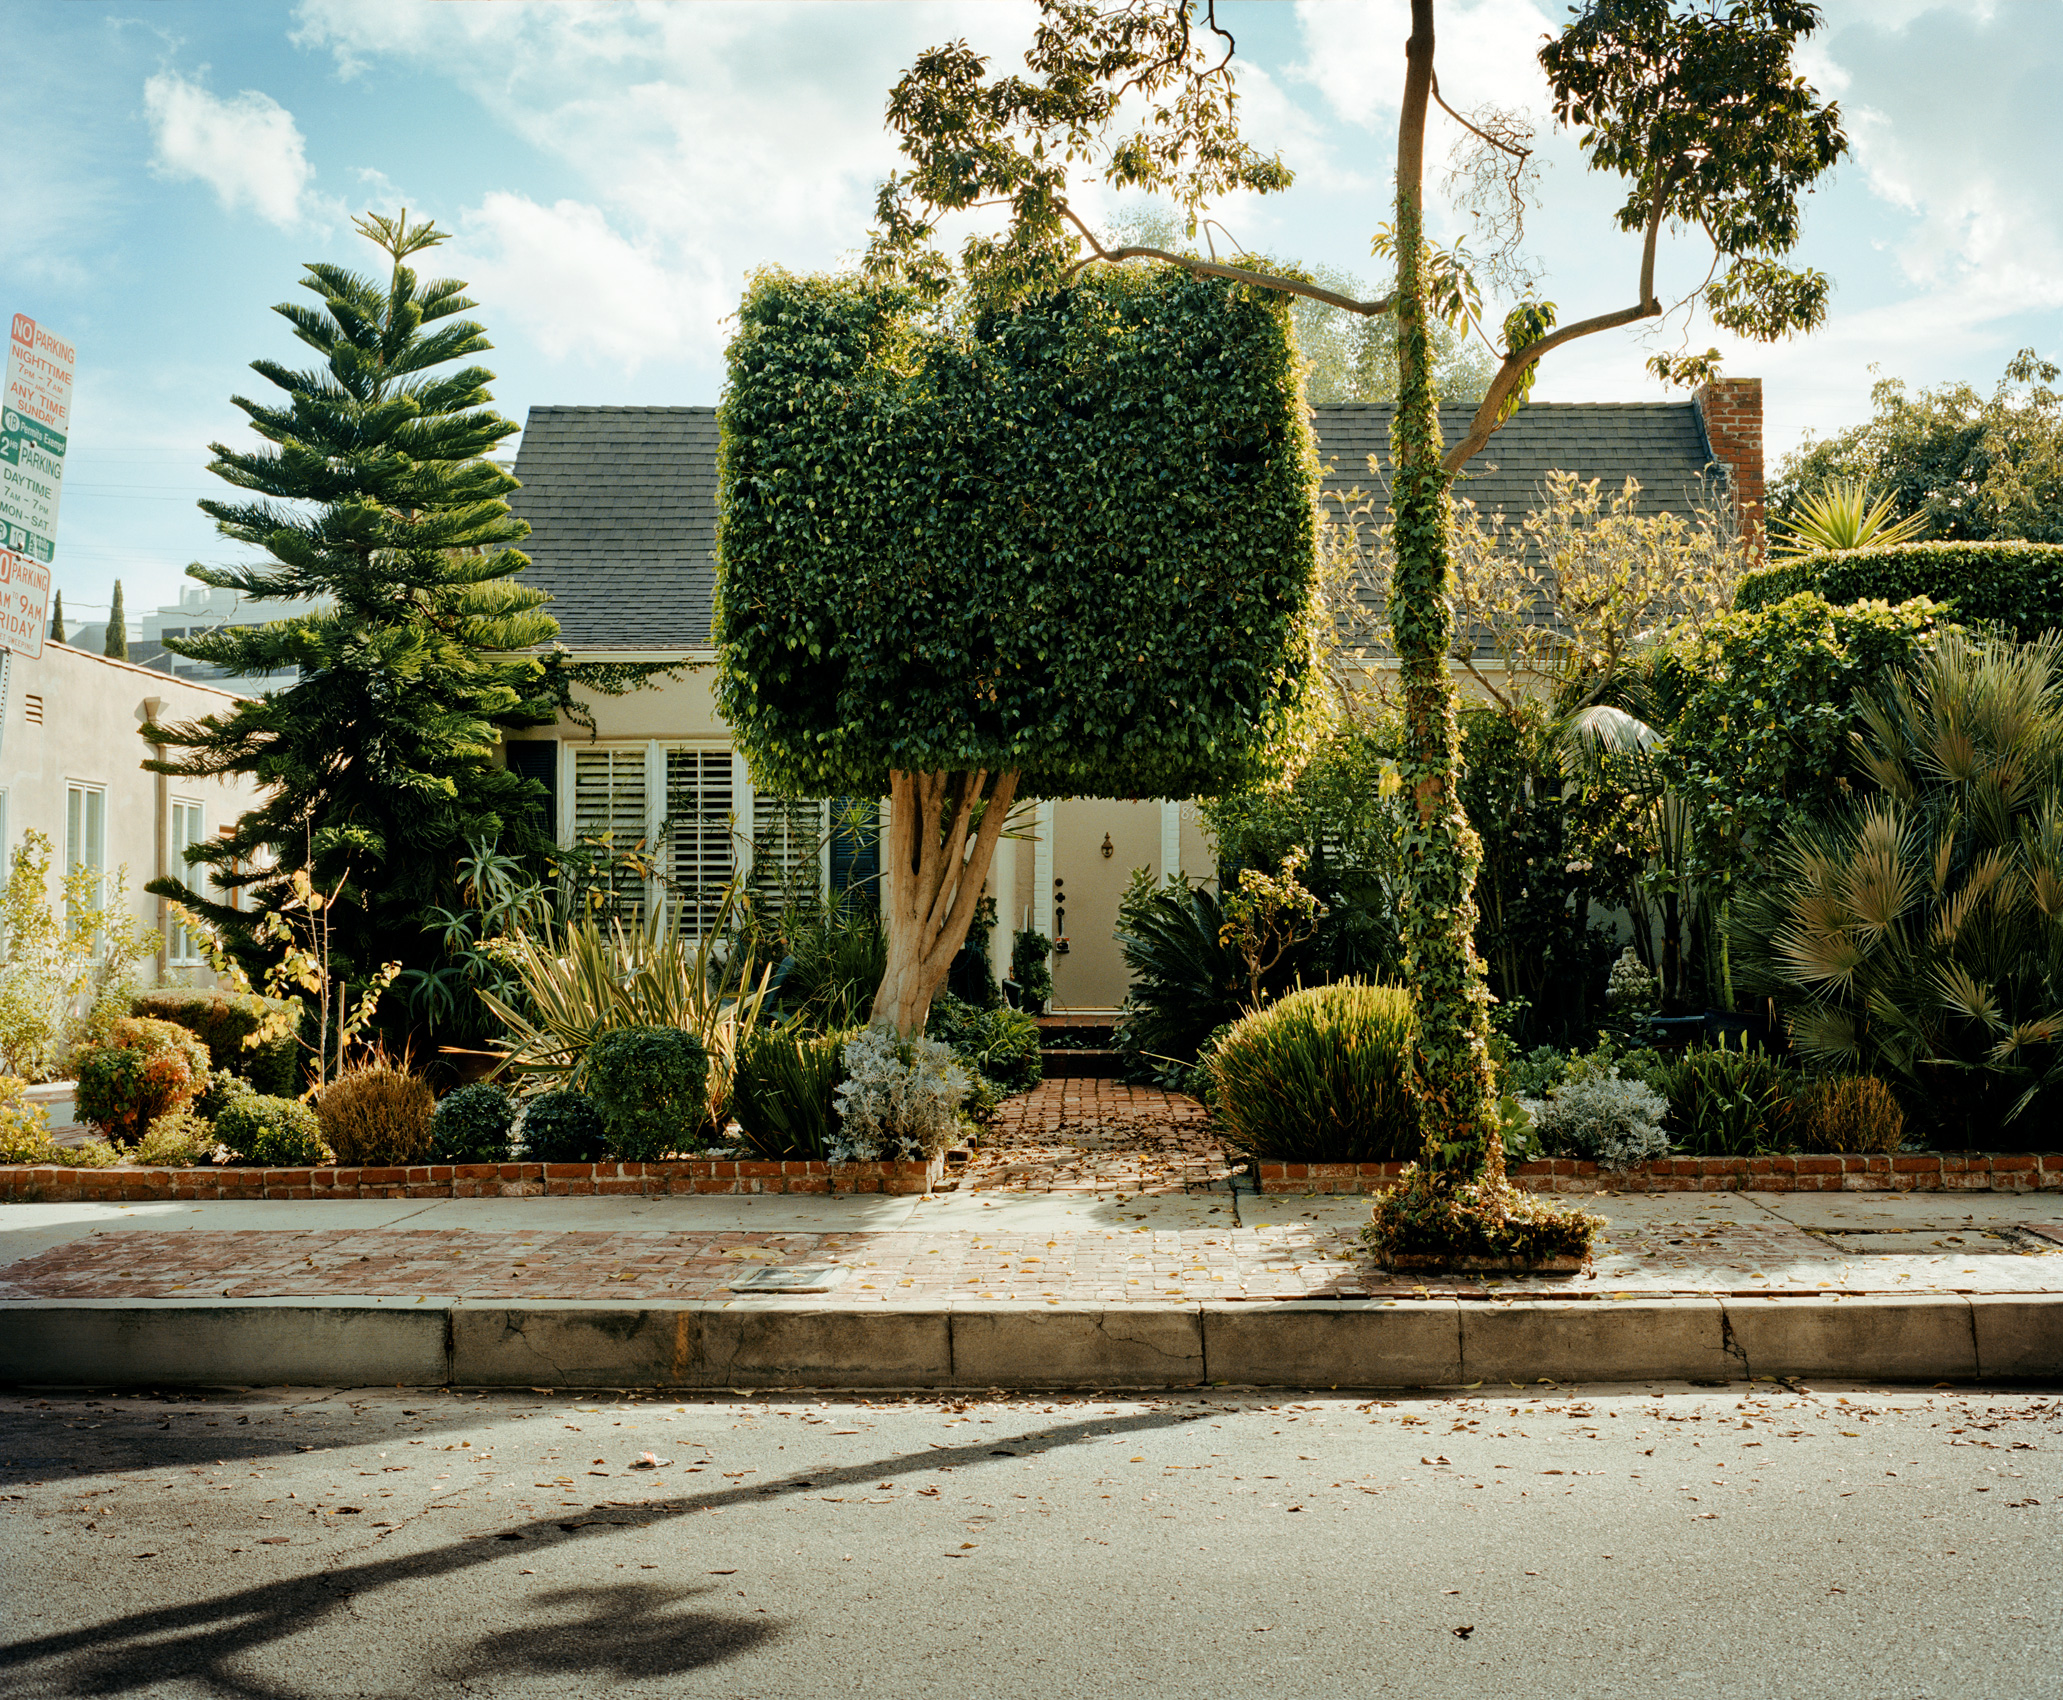 Shrubbery | Los Angeles